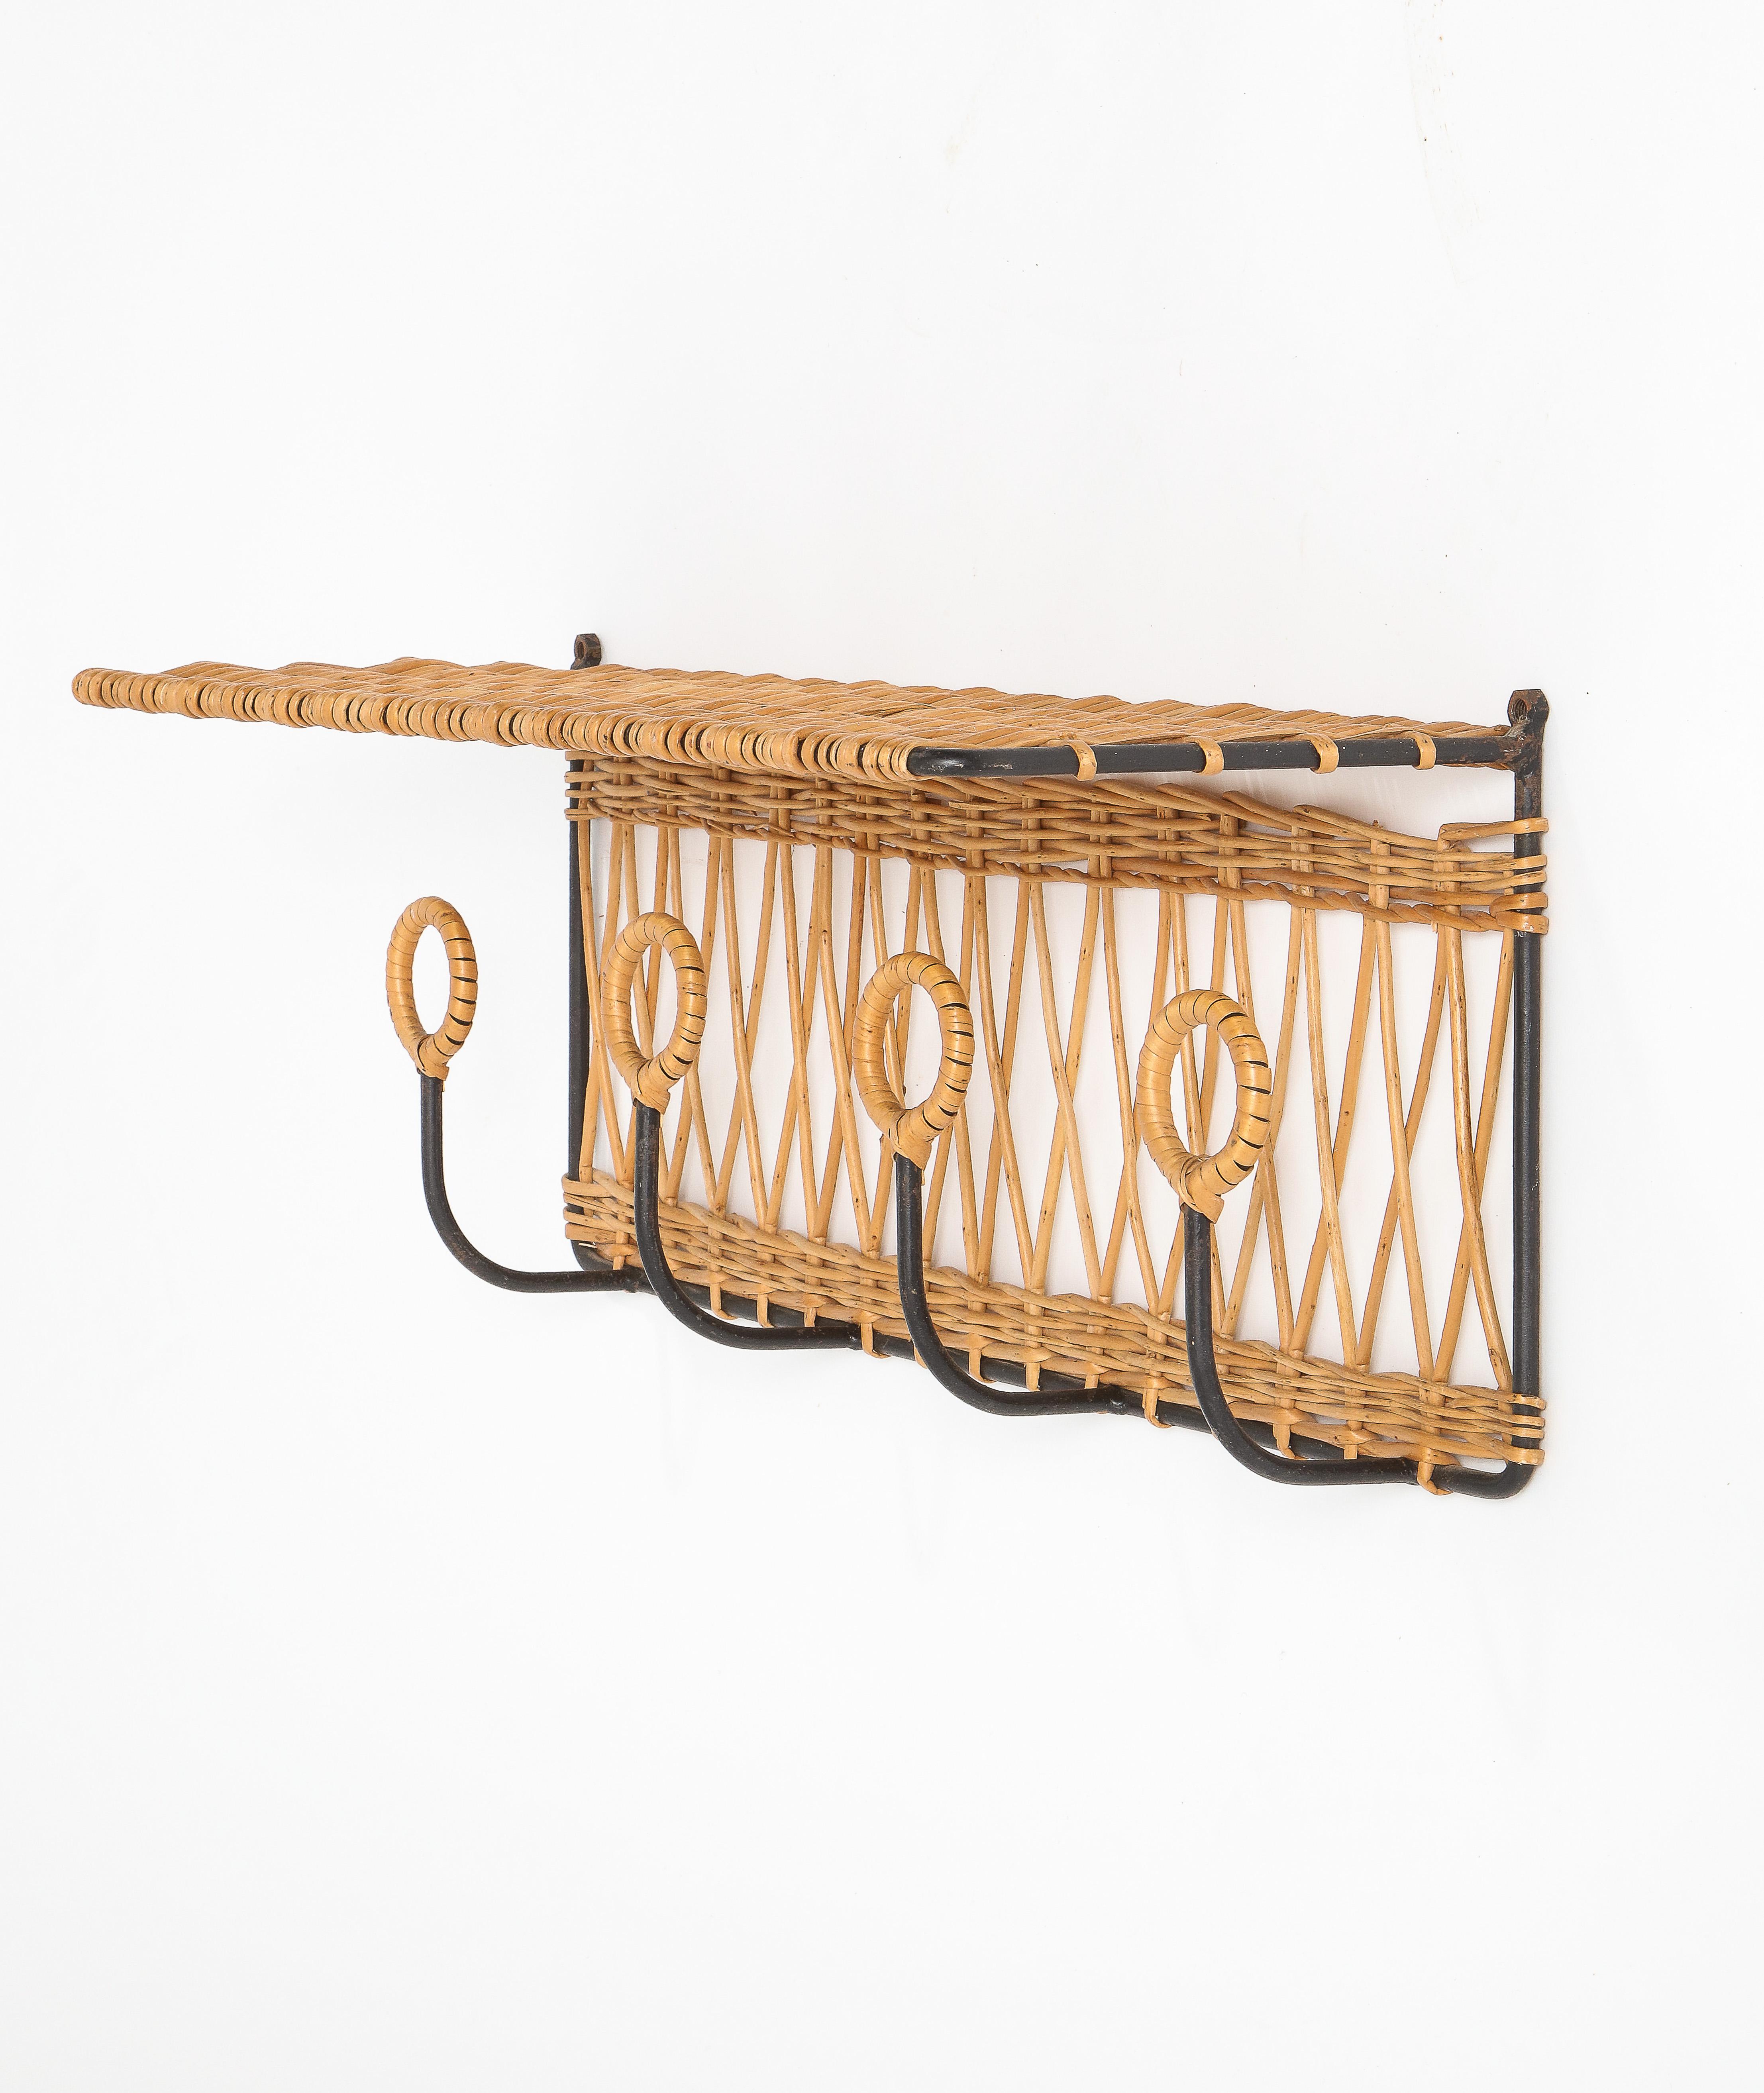 Wicker Rattan & Wrought Iron Coatrack Shelf, France 1960's In Good Condition For Sale In New York, NY